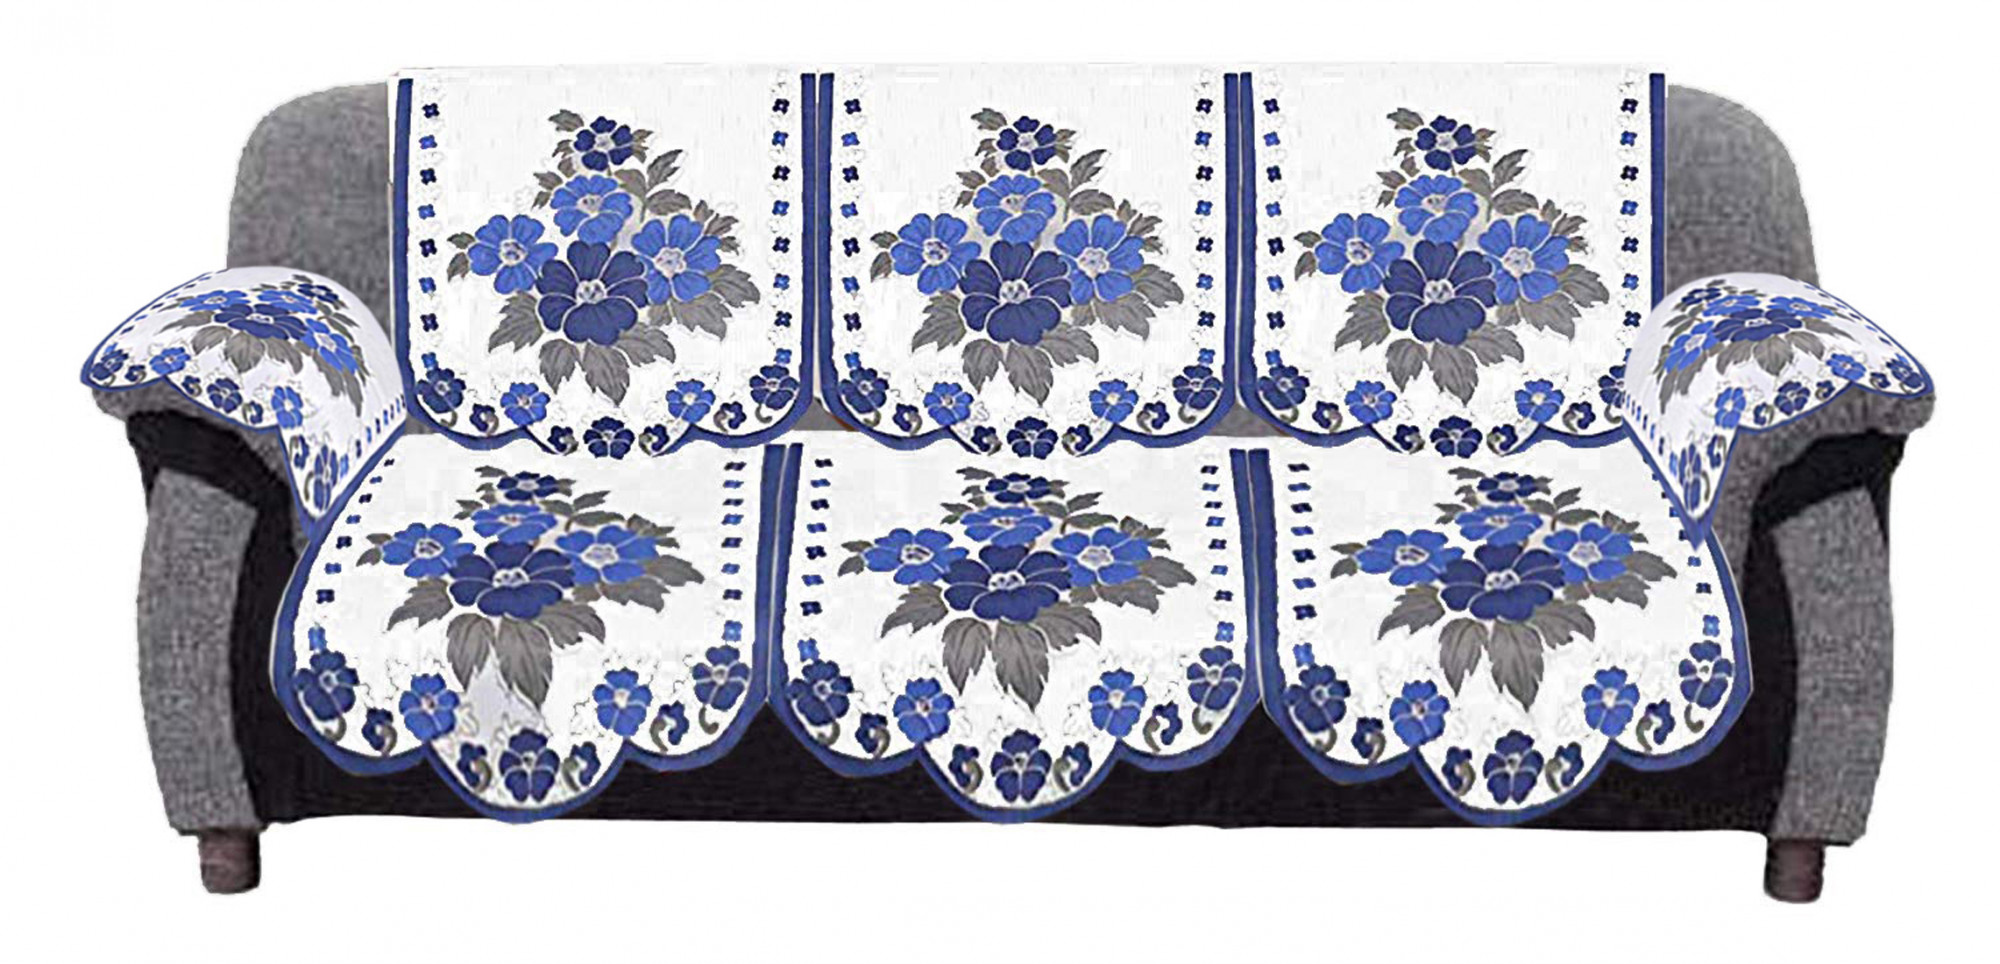 Kuber Industries Flower Design Cotton 5 Seater Sofa Cover With 6 Pieces Arms cover And 1 Center Table Cover Use Both Side, Living Room, Drawing Room, Bedroom, Guest Room (Set Of17, White & Blue)-KUBMRT12025